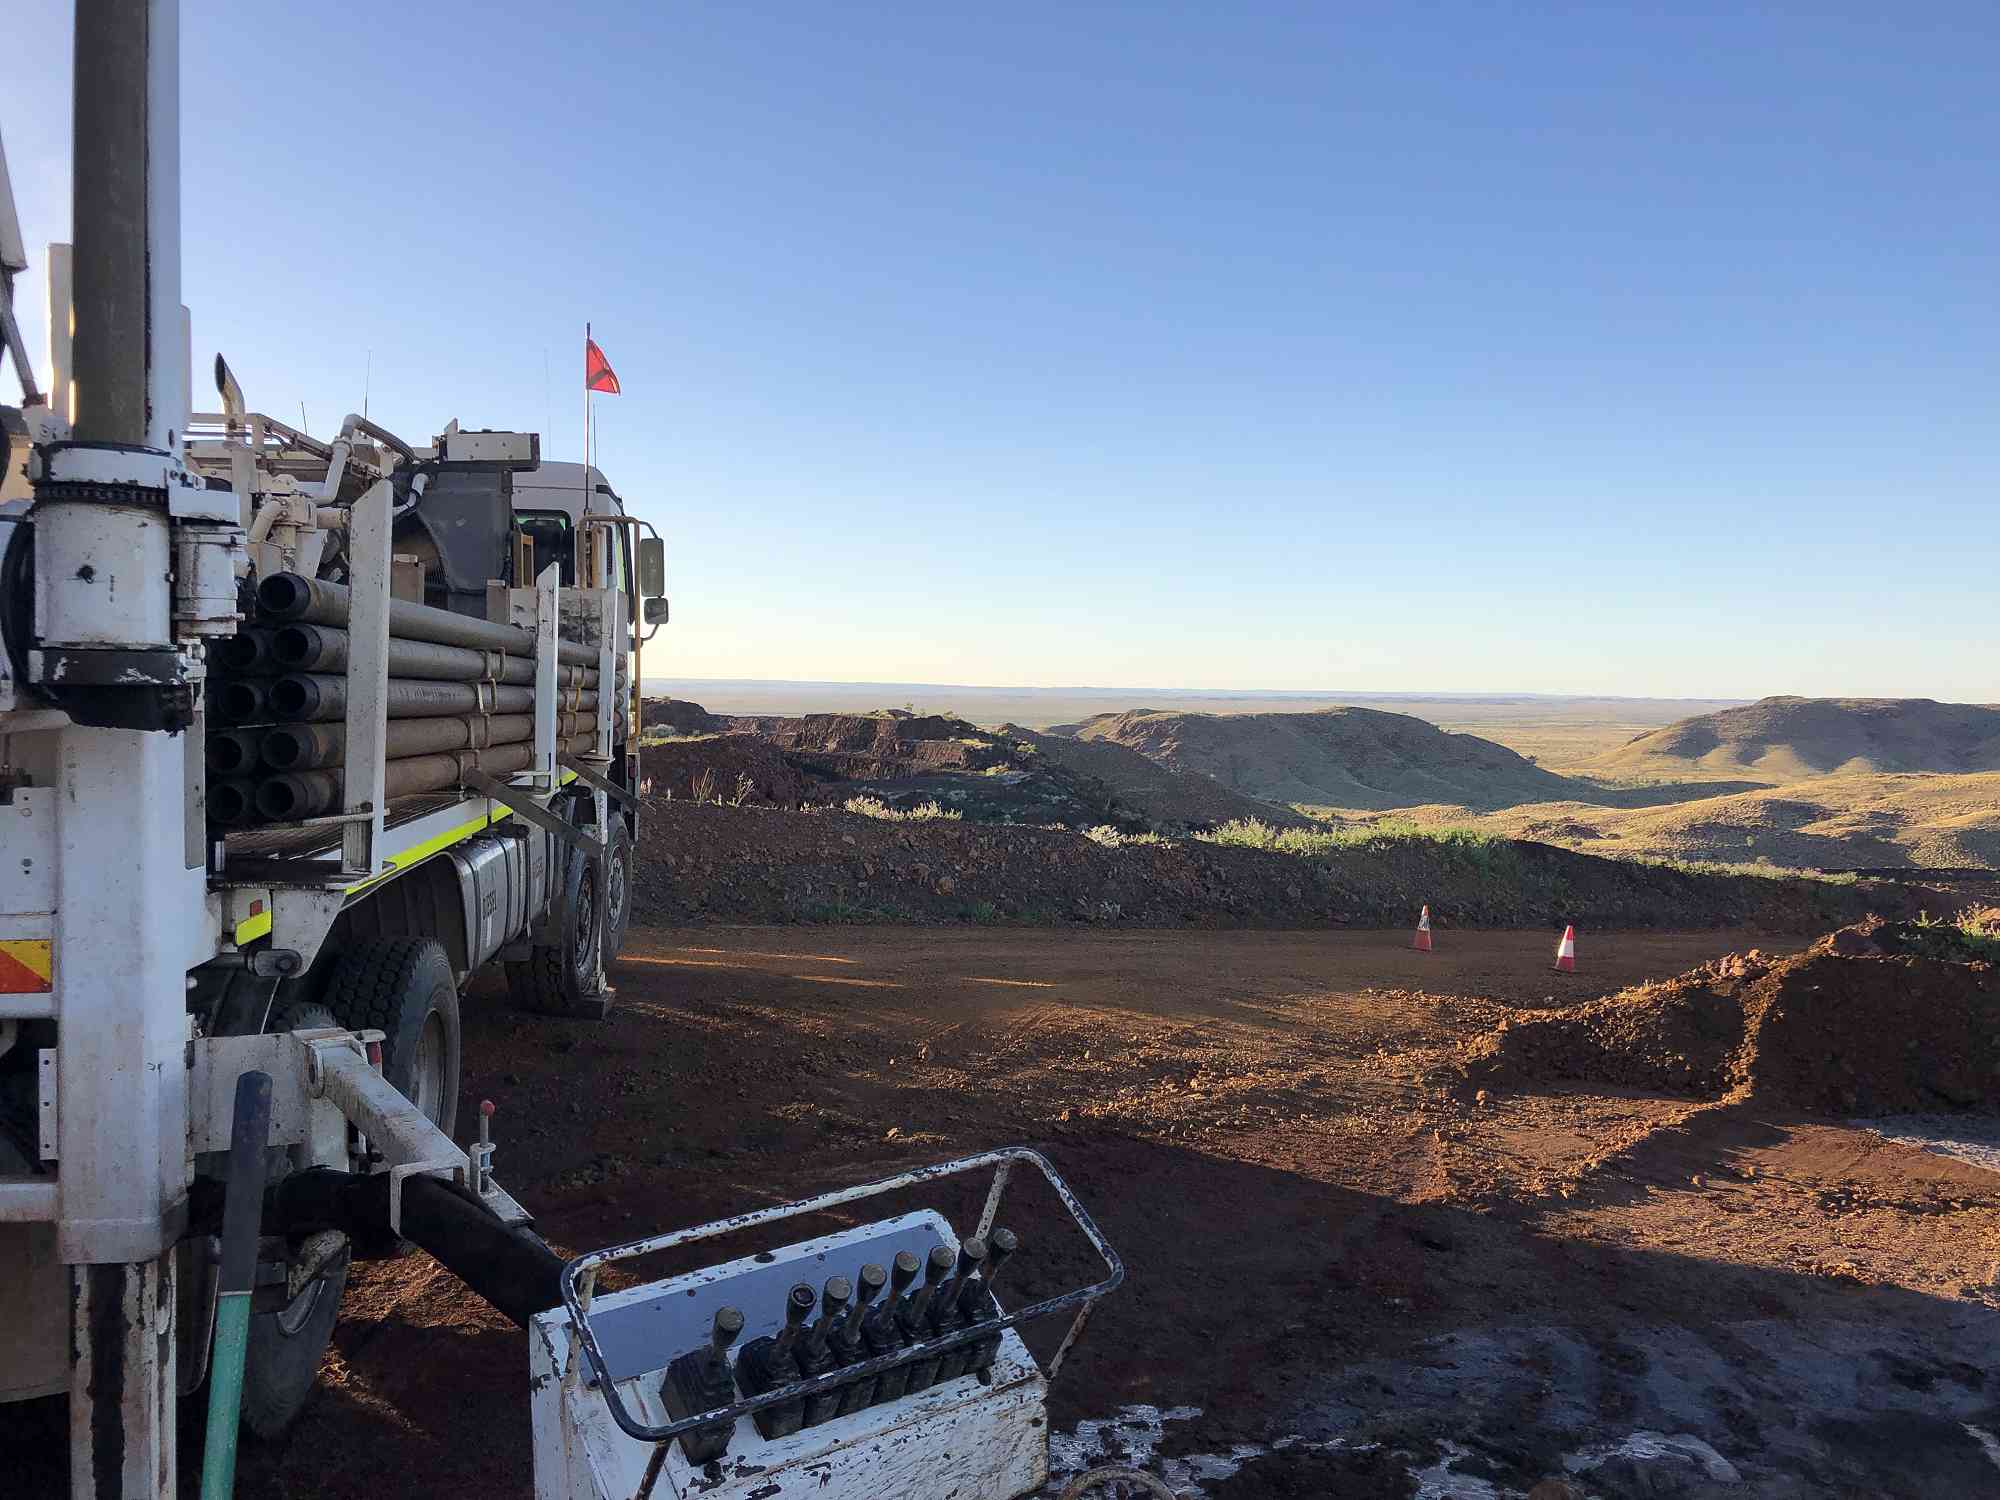 Rig 2 on top of the world in the Pilbara